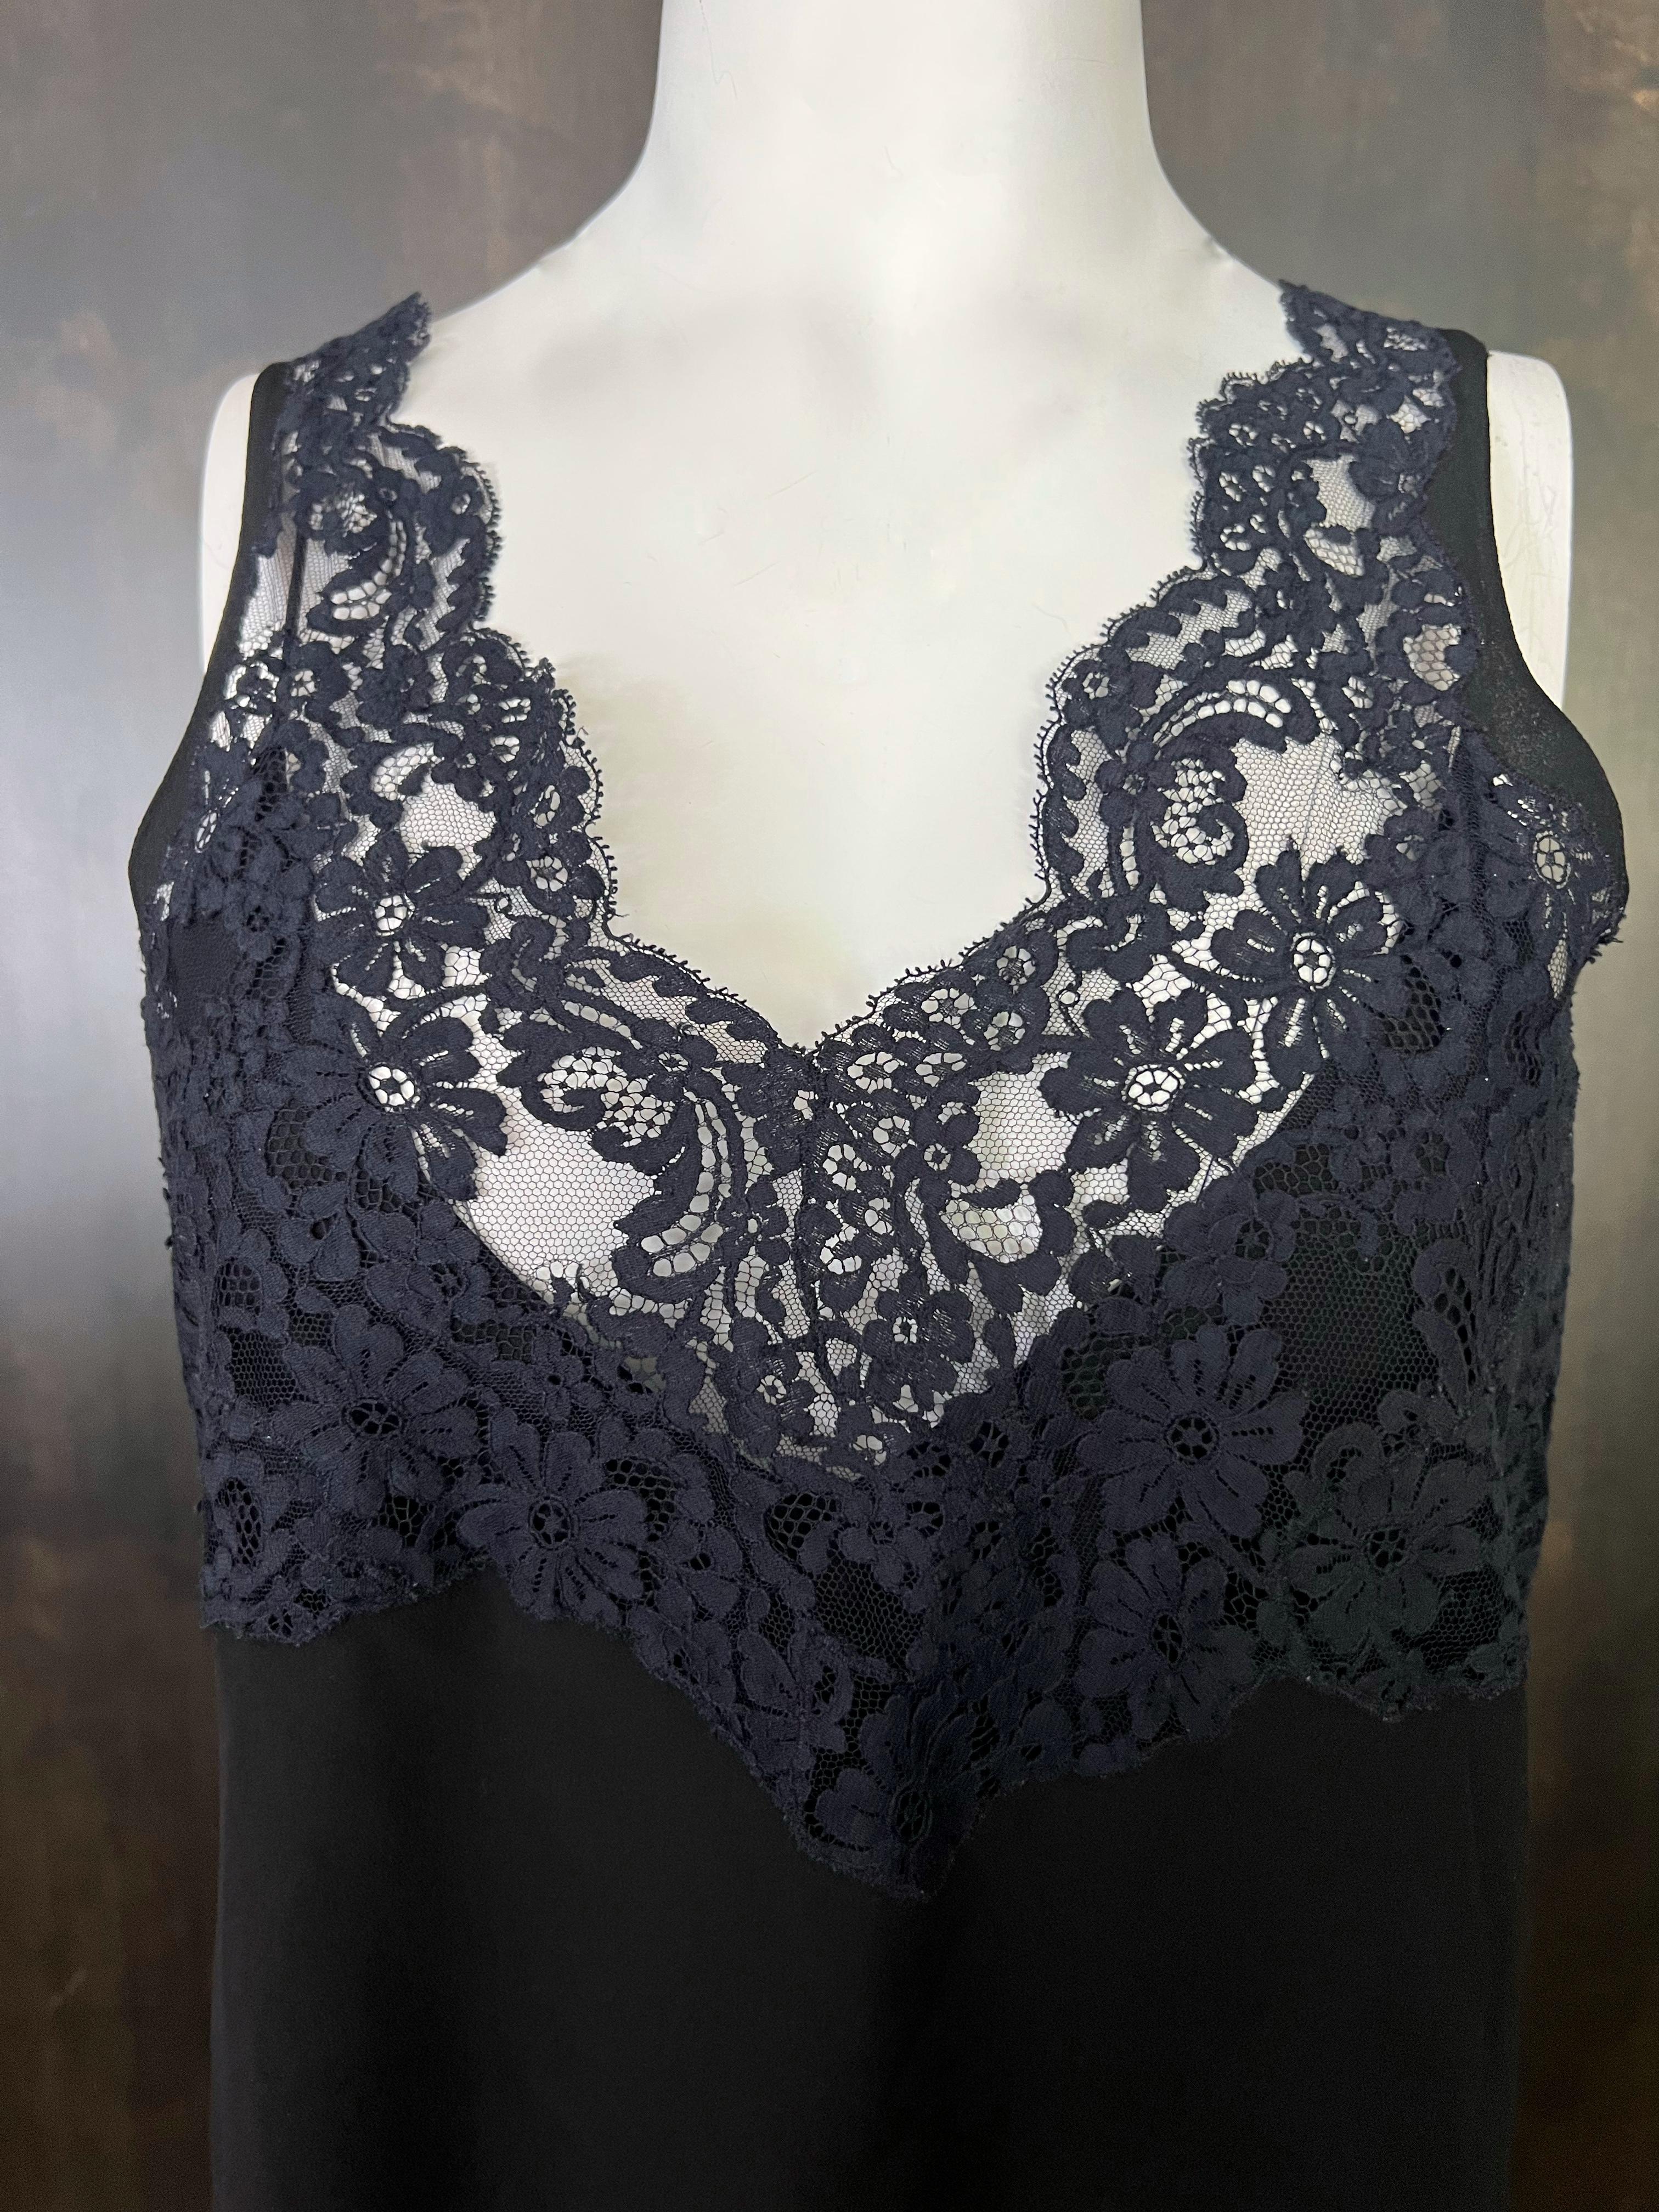 - Sleeveless
- Featuring black slick with navy lace detail
- Includes black cami top with spaghetti straps 
- V neckline


